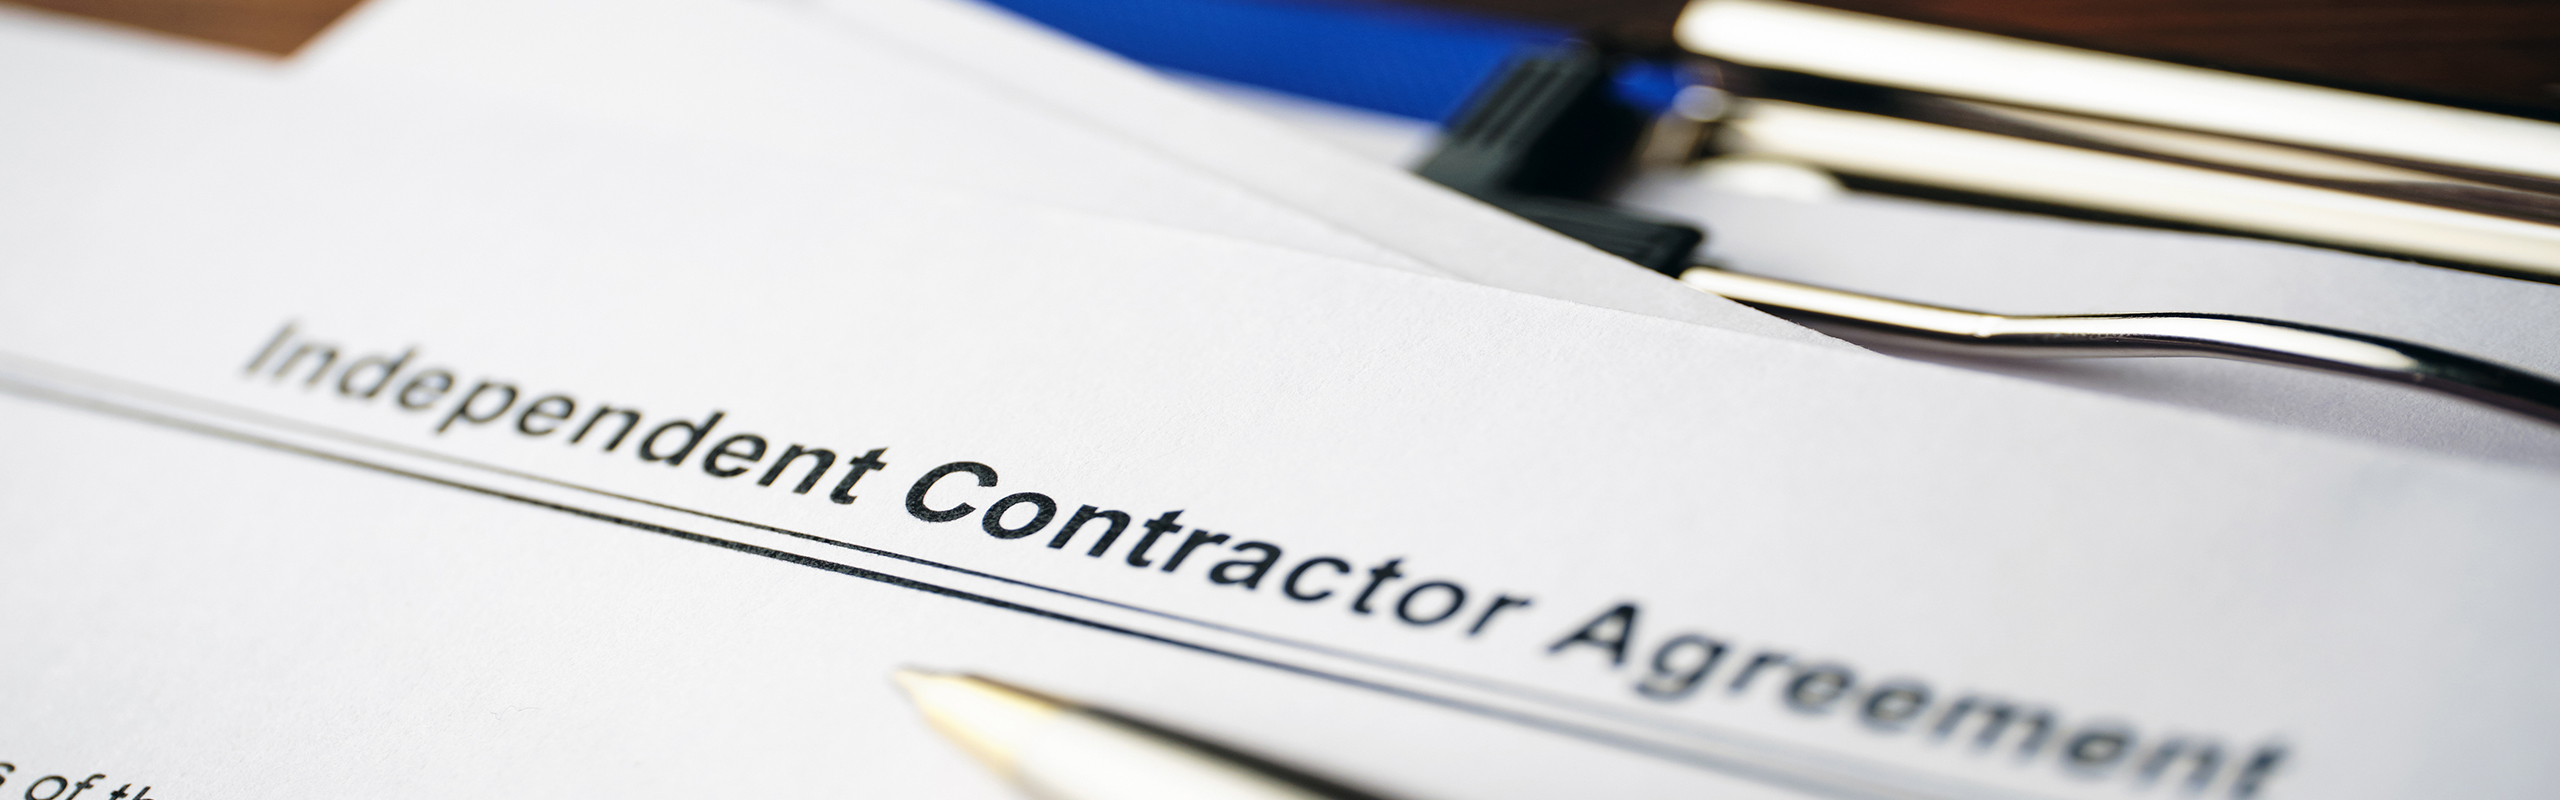 Classifying independent contractors